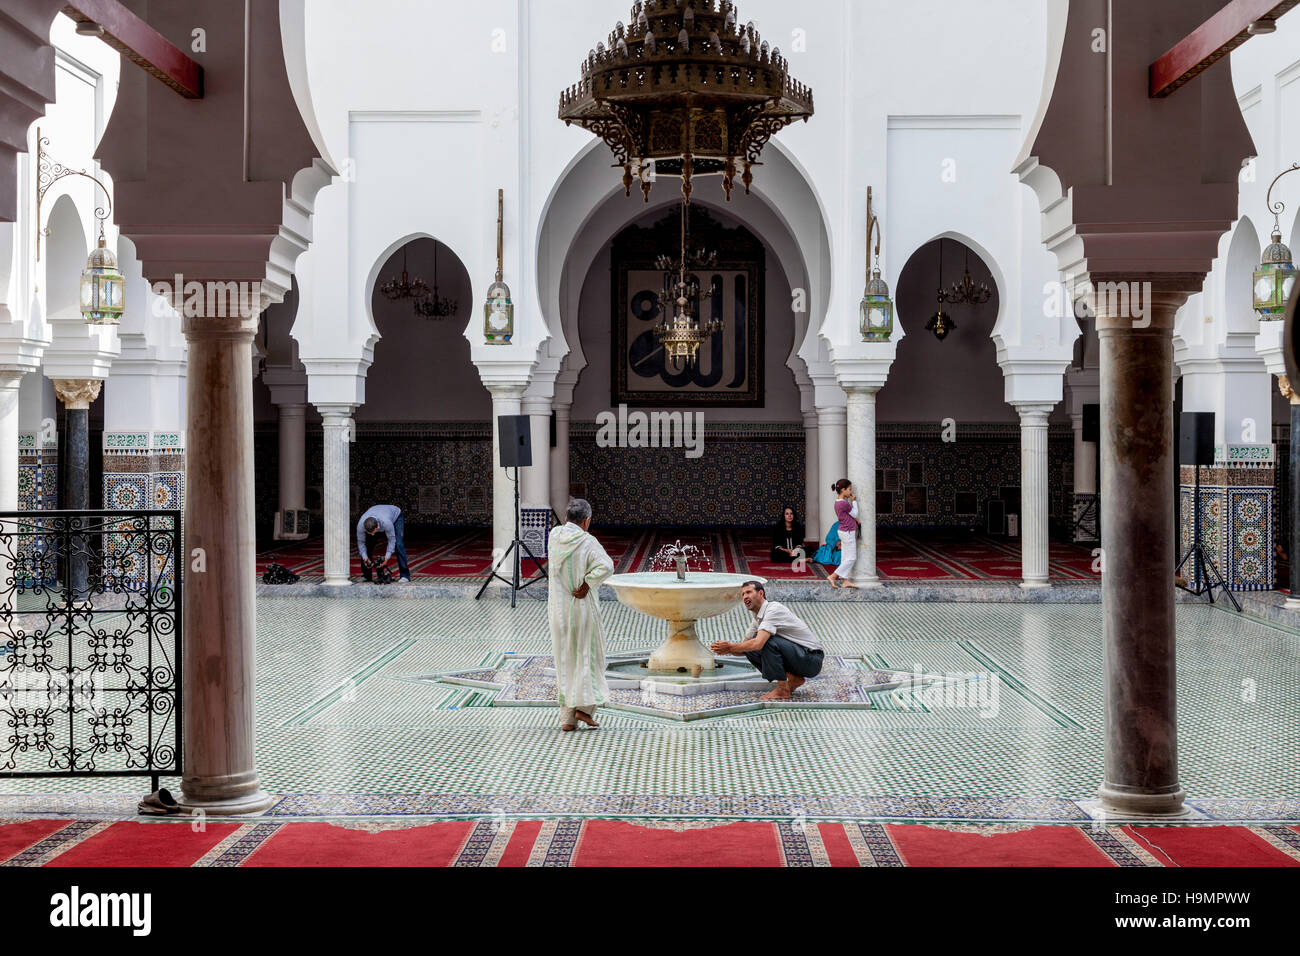 The Interior Of The Zaouia Moulay Idriss 2 Mosque and Shrine, Fez el Bali, Fez, Morocco Stock Photo